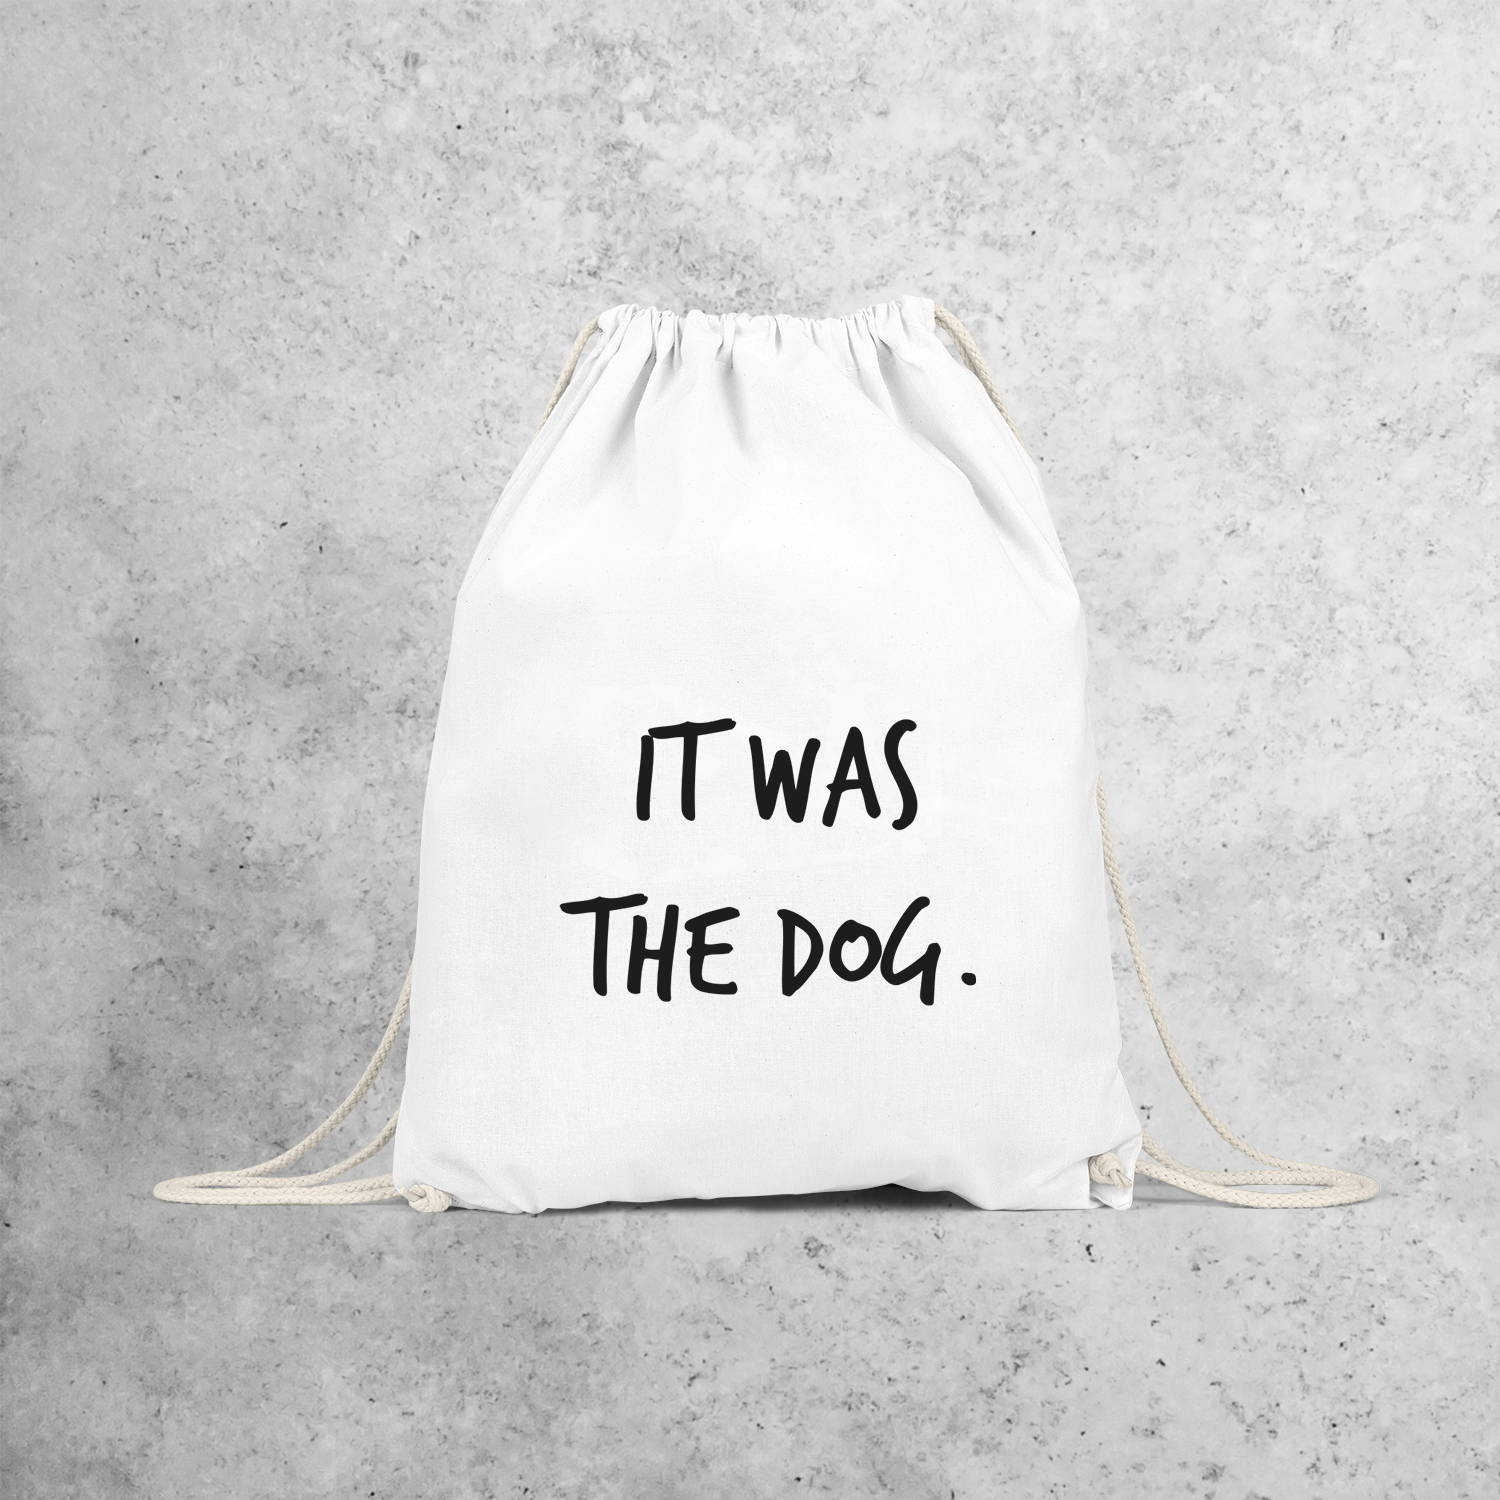 'It was the dog' backpack